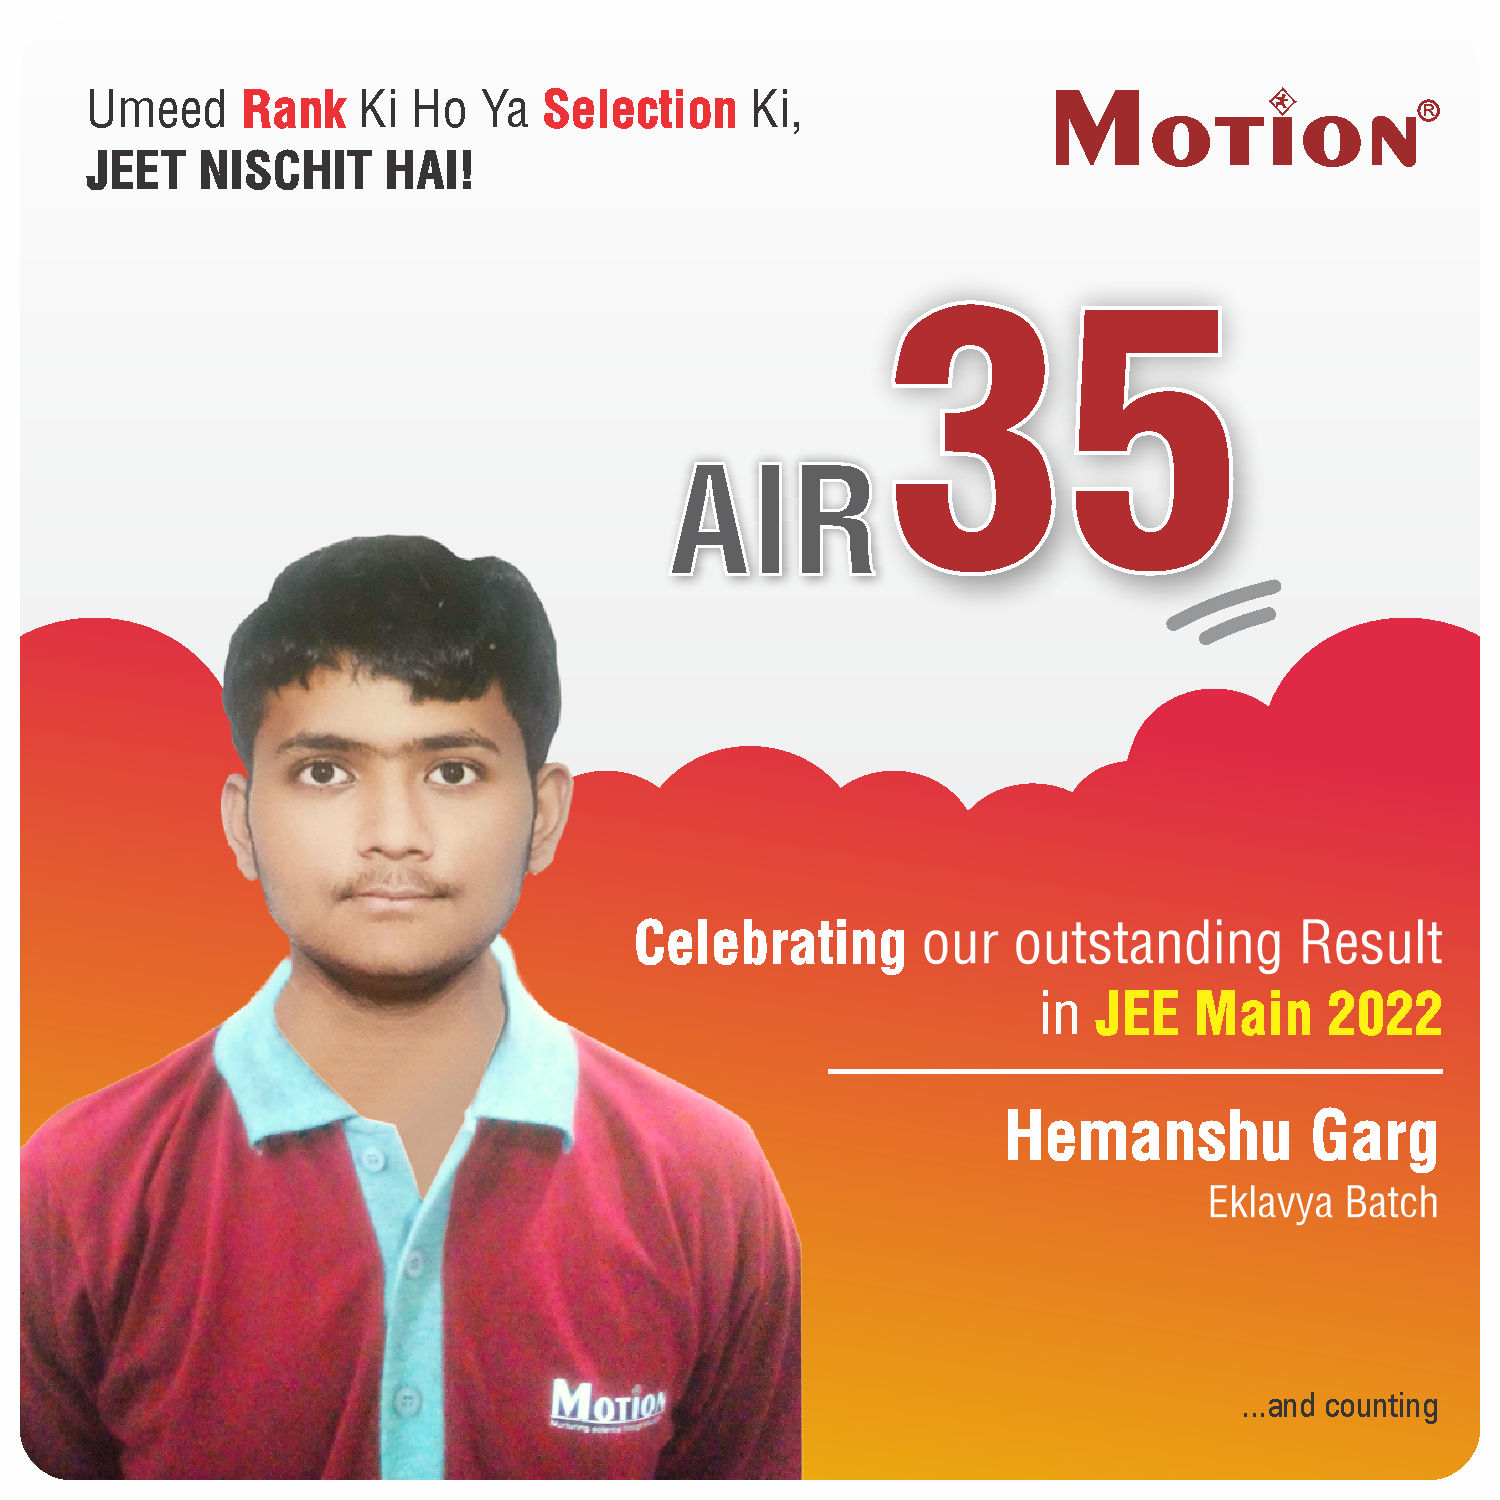 JEE Main Result 2022 Motion AIR 35